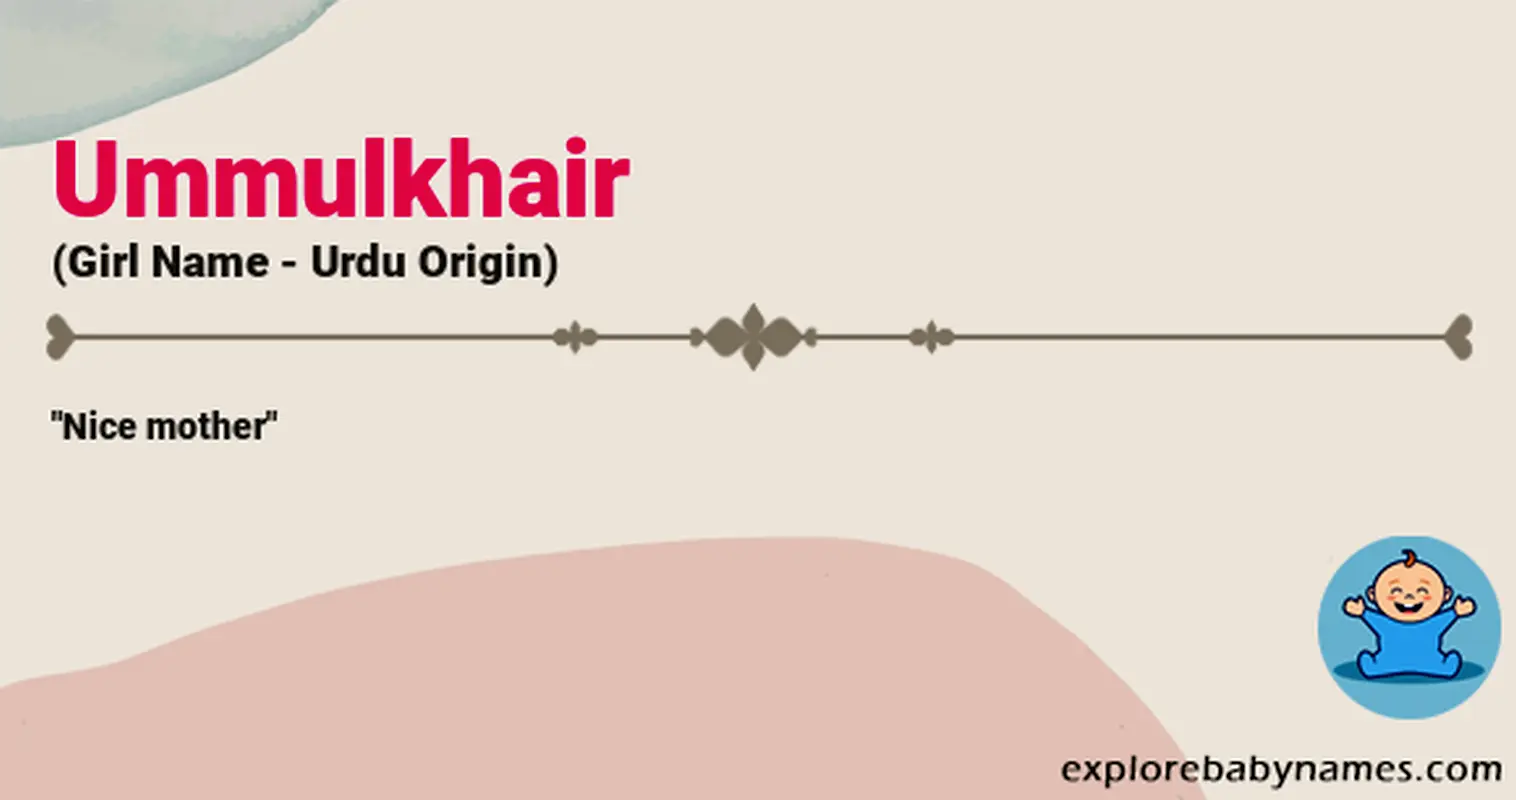 Meaning of Ummulkhair